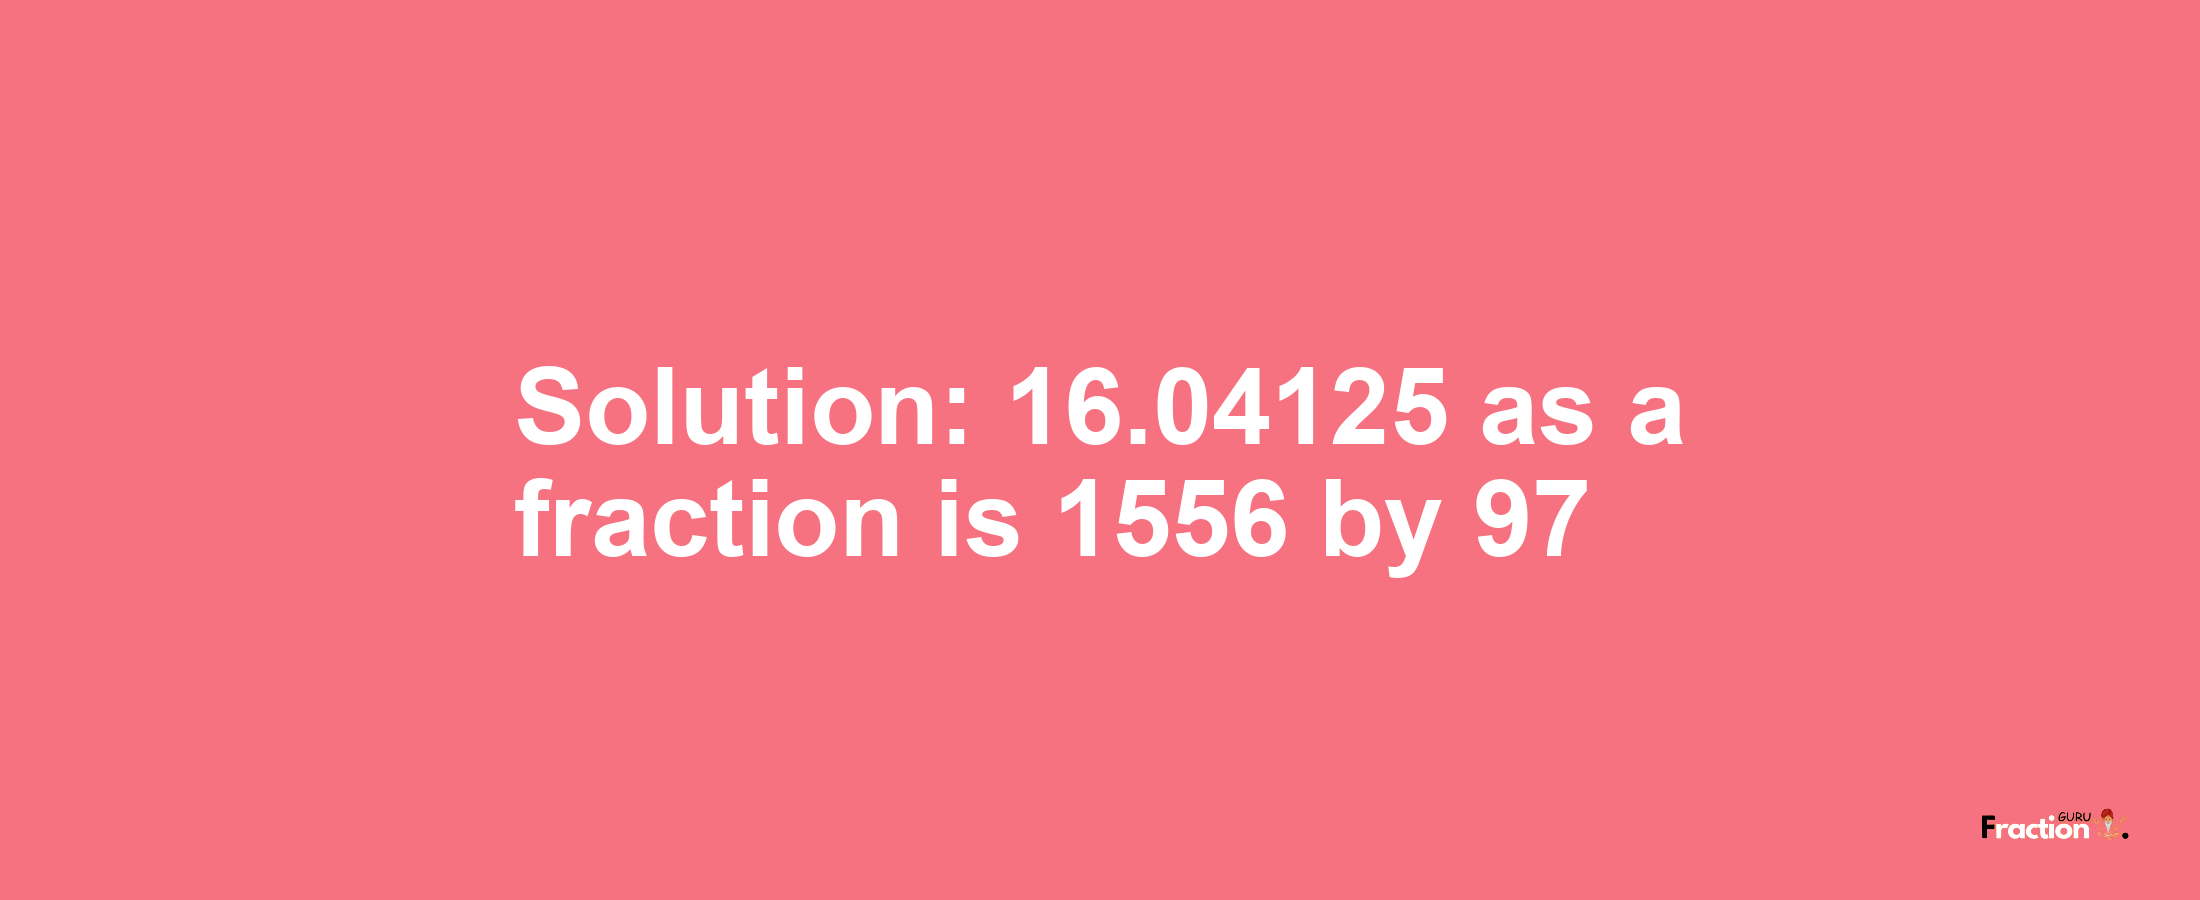 Solution:16.04125 as a fraction is 1556/97